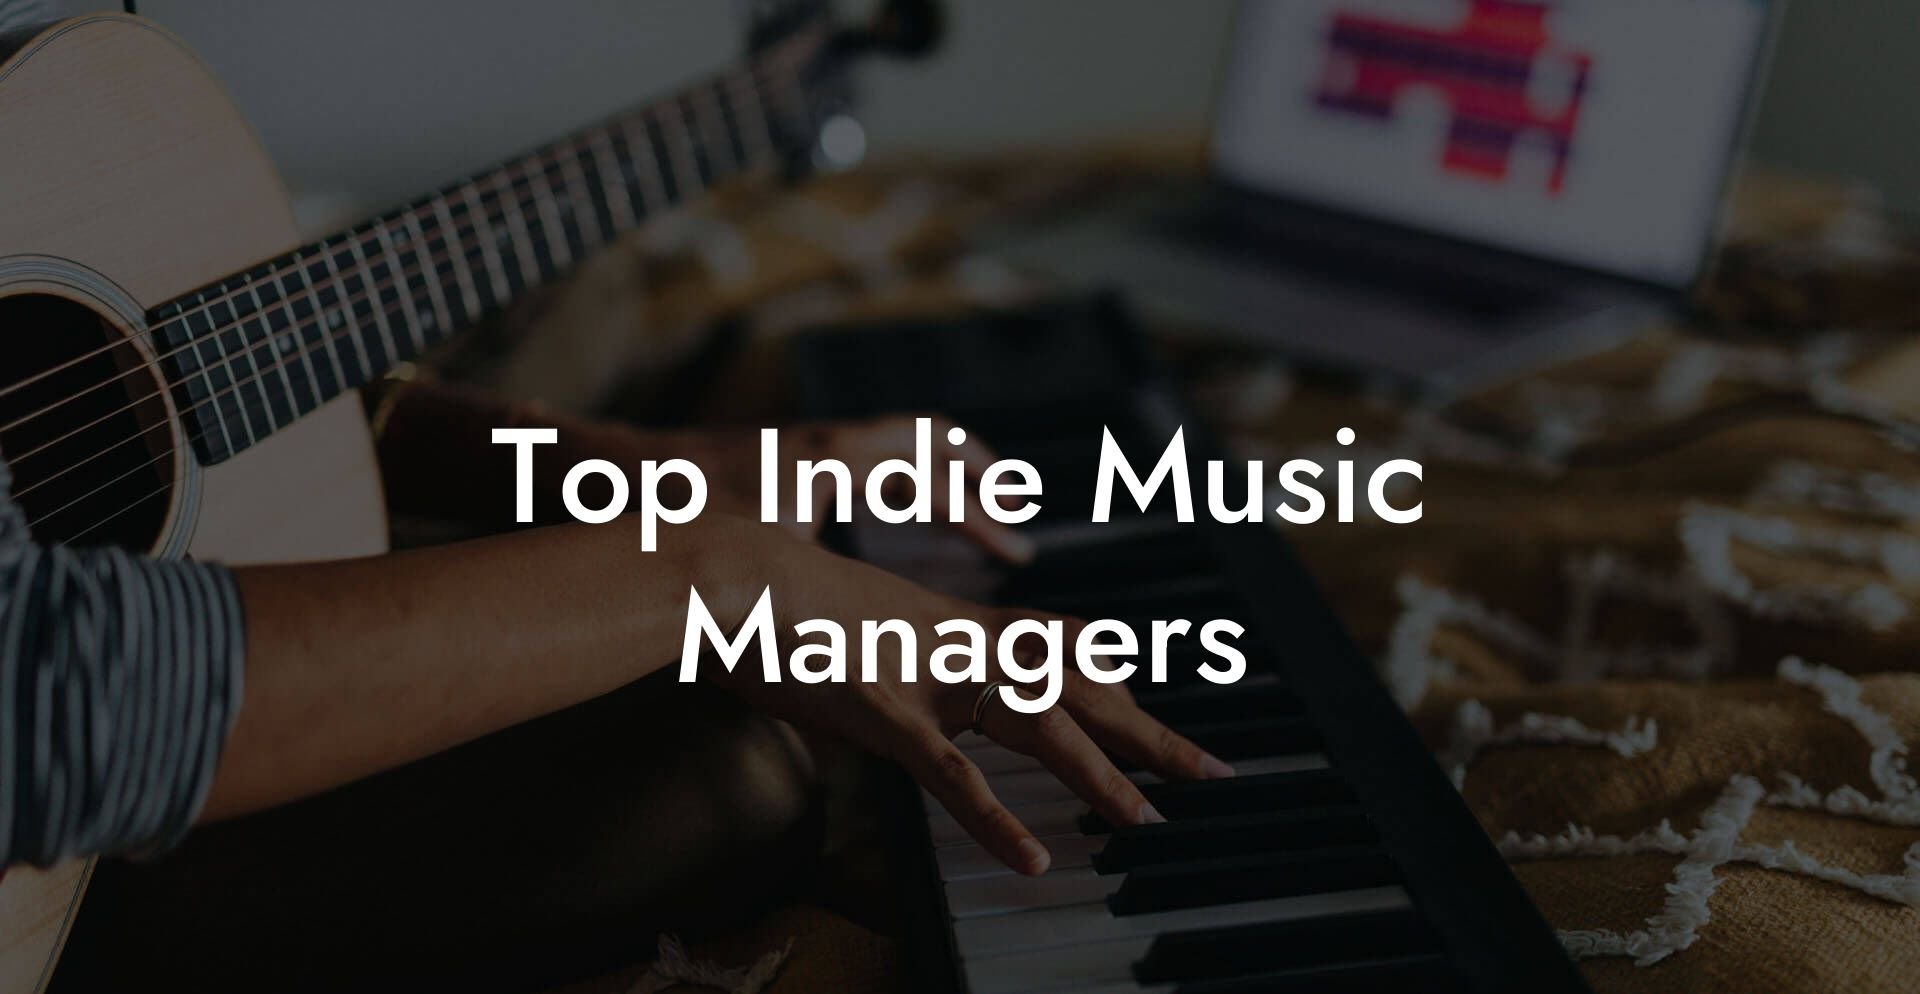 Top Indie Music Managers